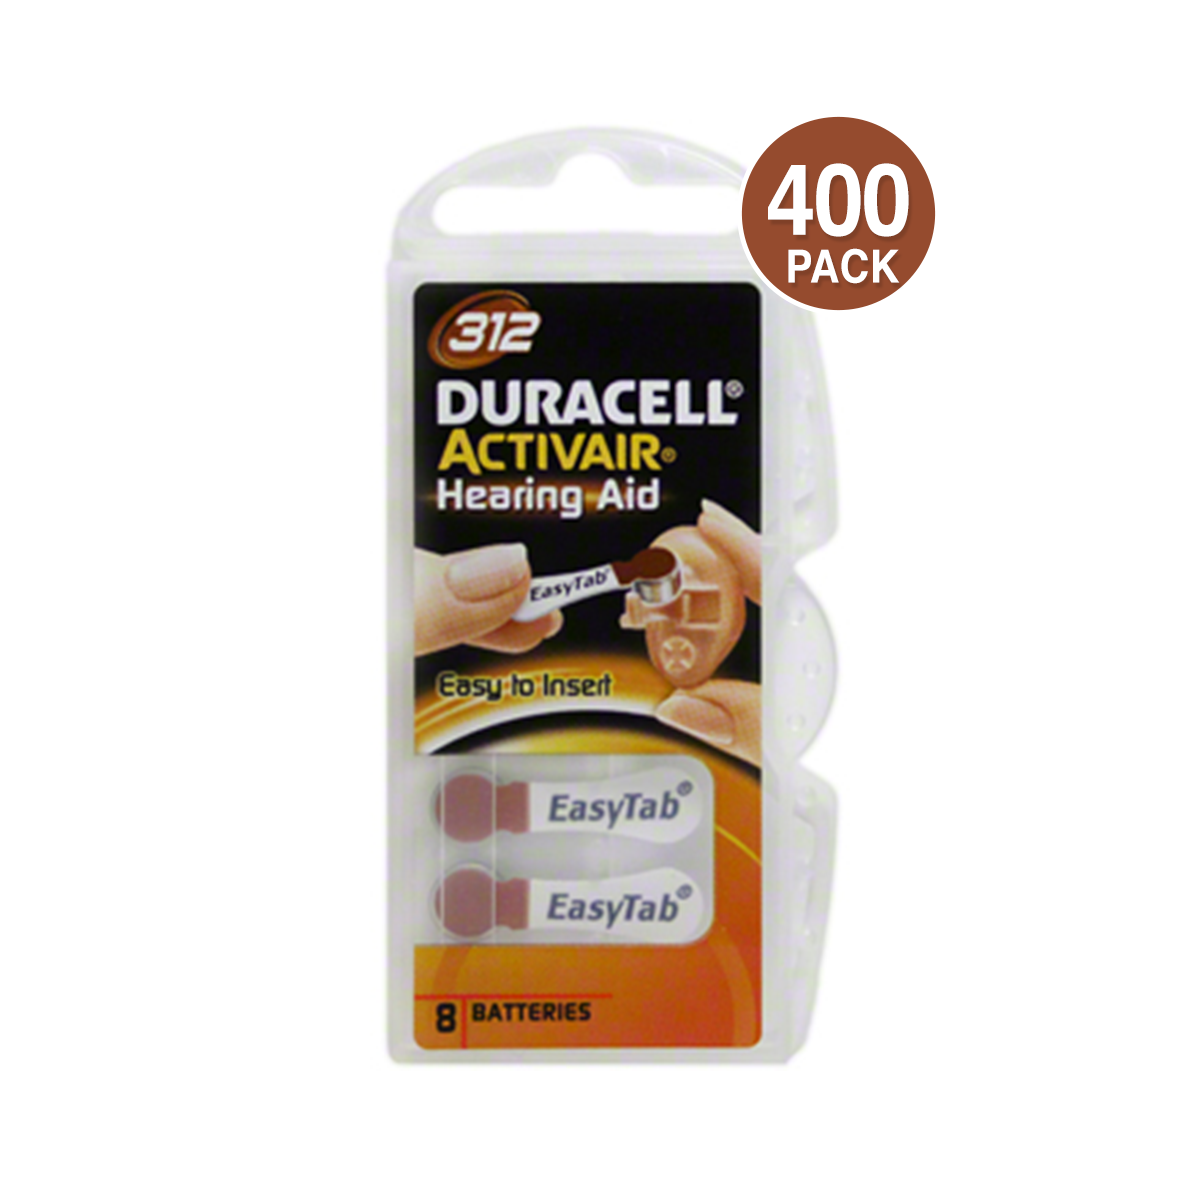 Duracell Hearing Aid Battery Size 312 (400 Pcs)